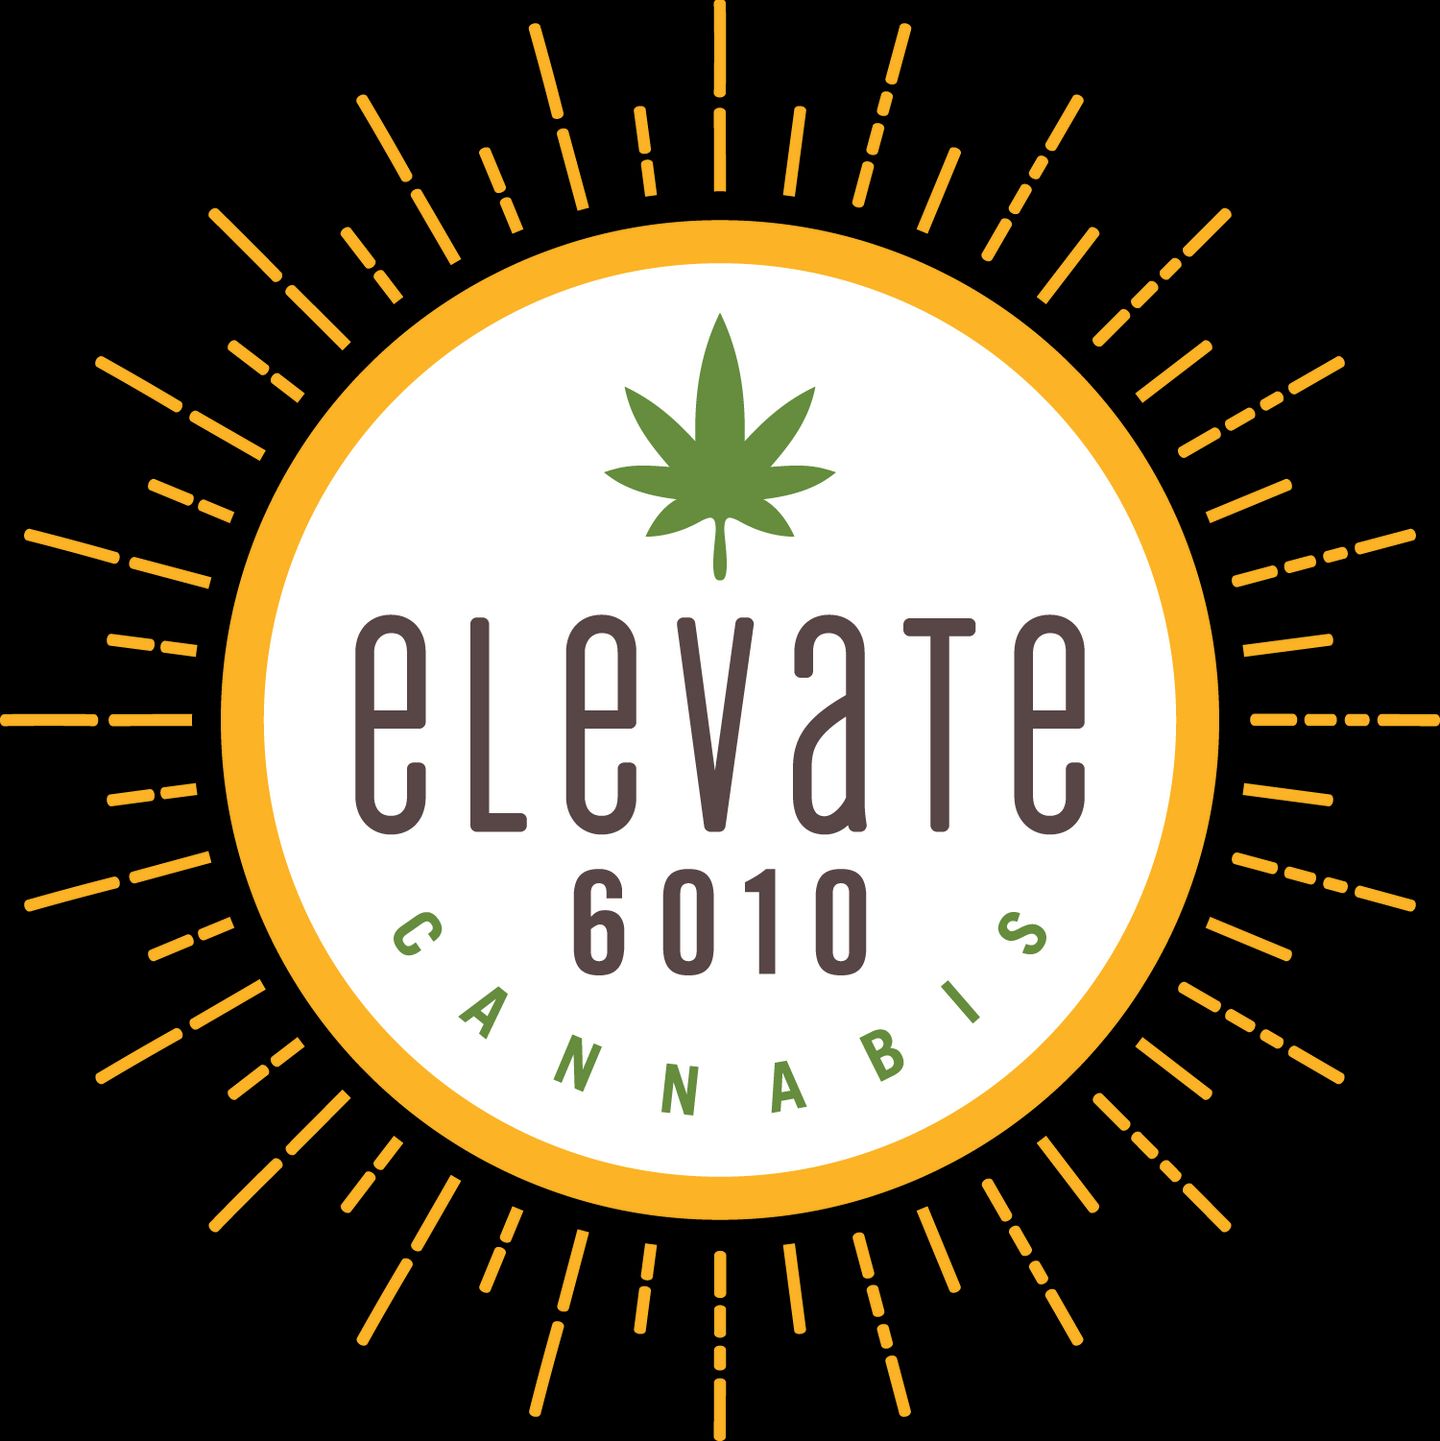 image feature Elevate 6010